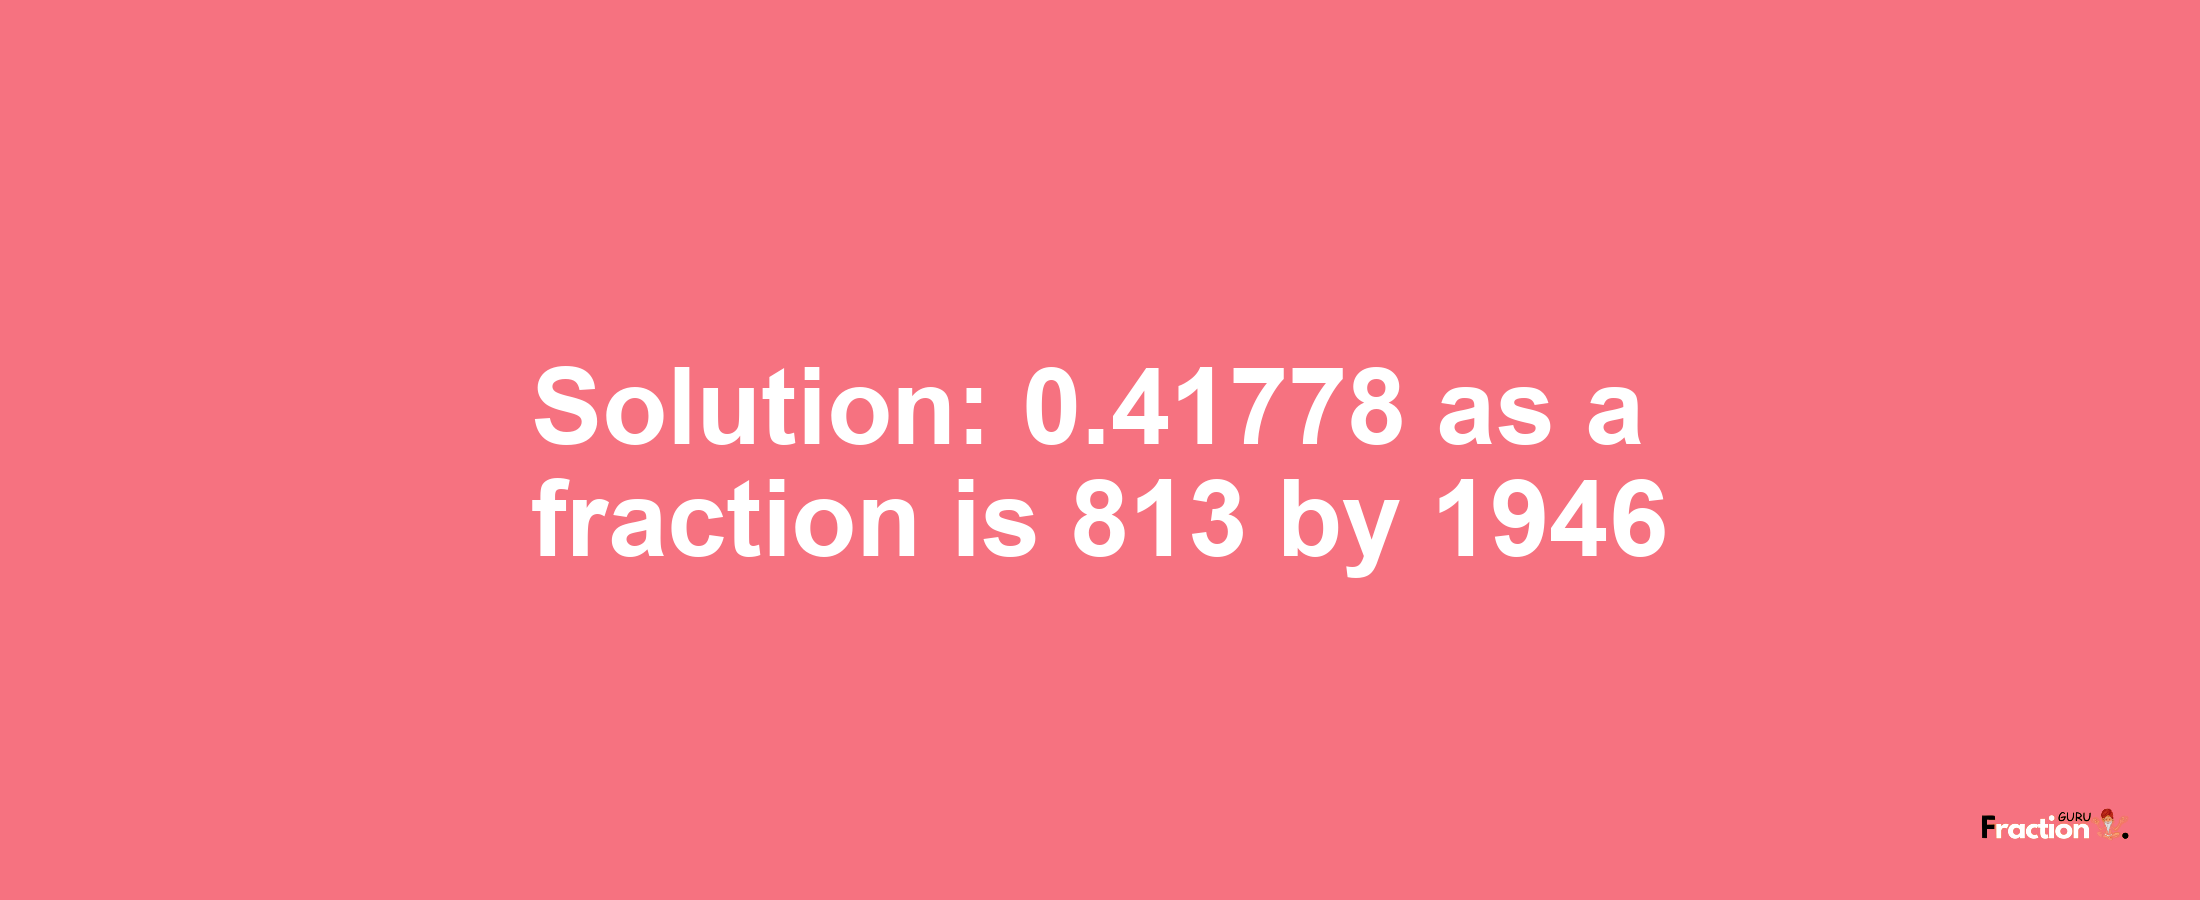 Solution:0.41778 as a fraction is 813/1946